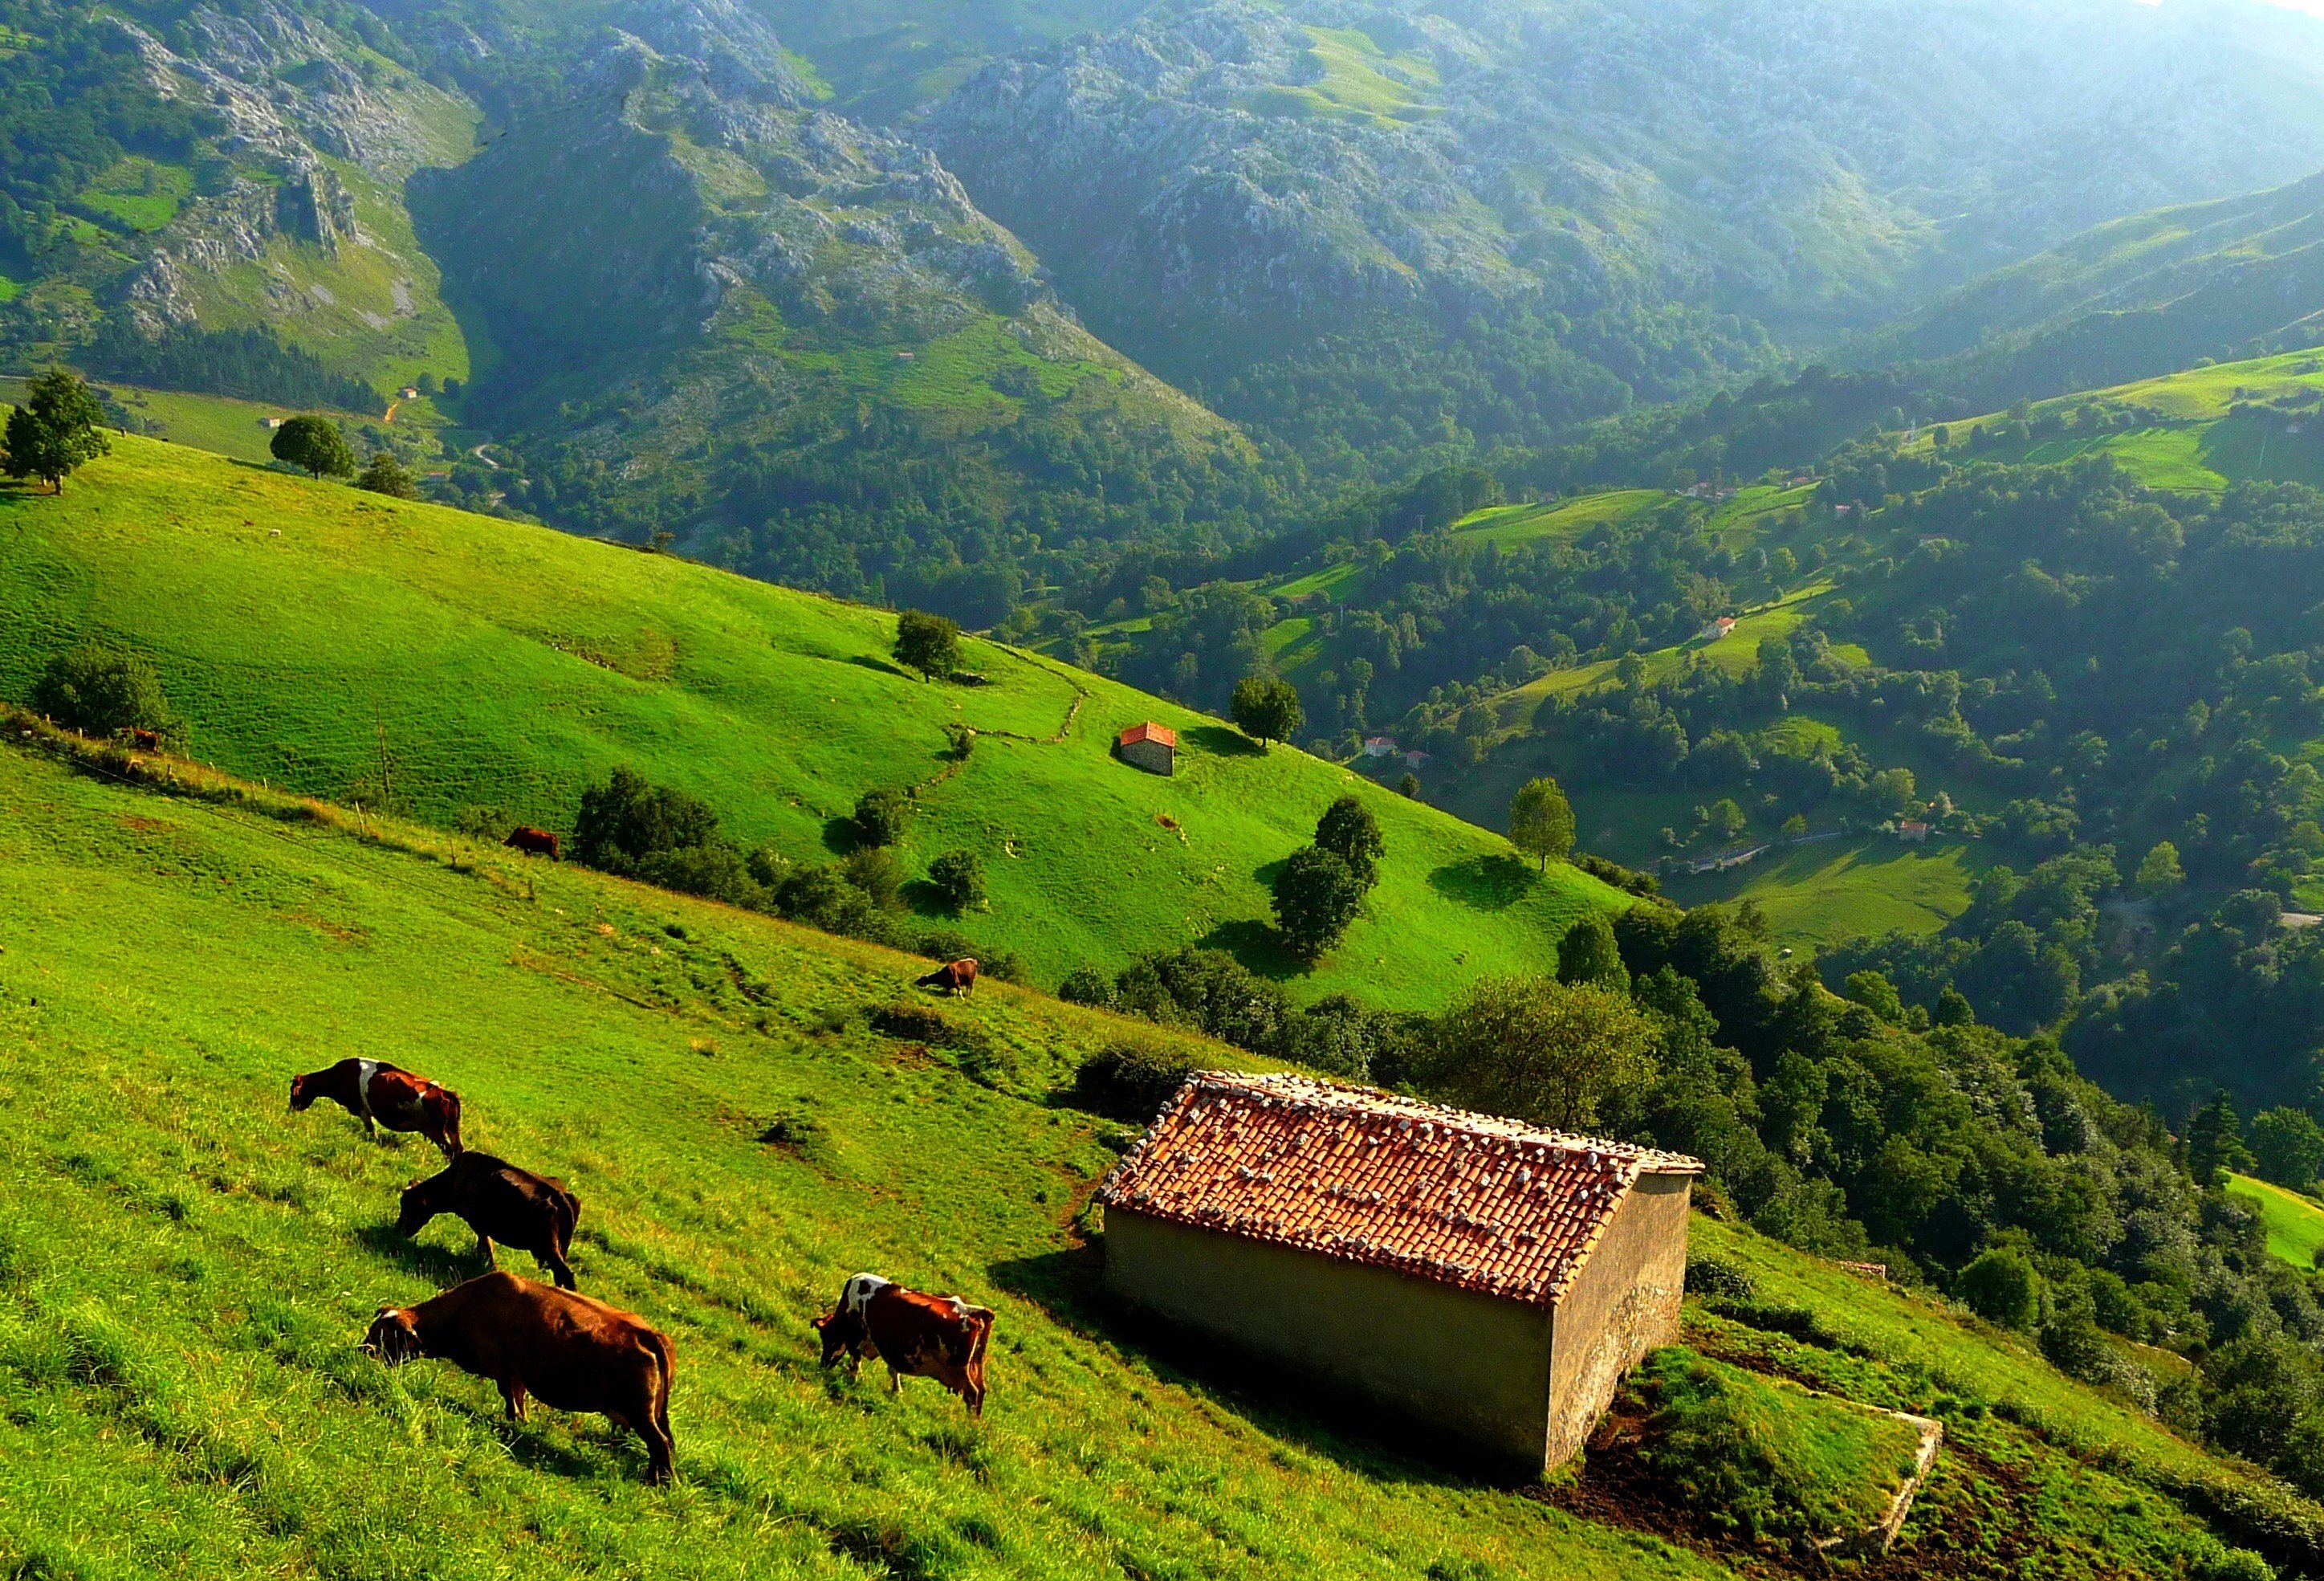 mountains, Hills, Trees, Grass, House, Cow, View, From, The, Top, Landscape Wallpaper